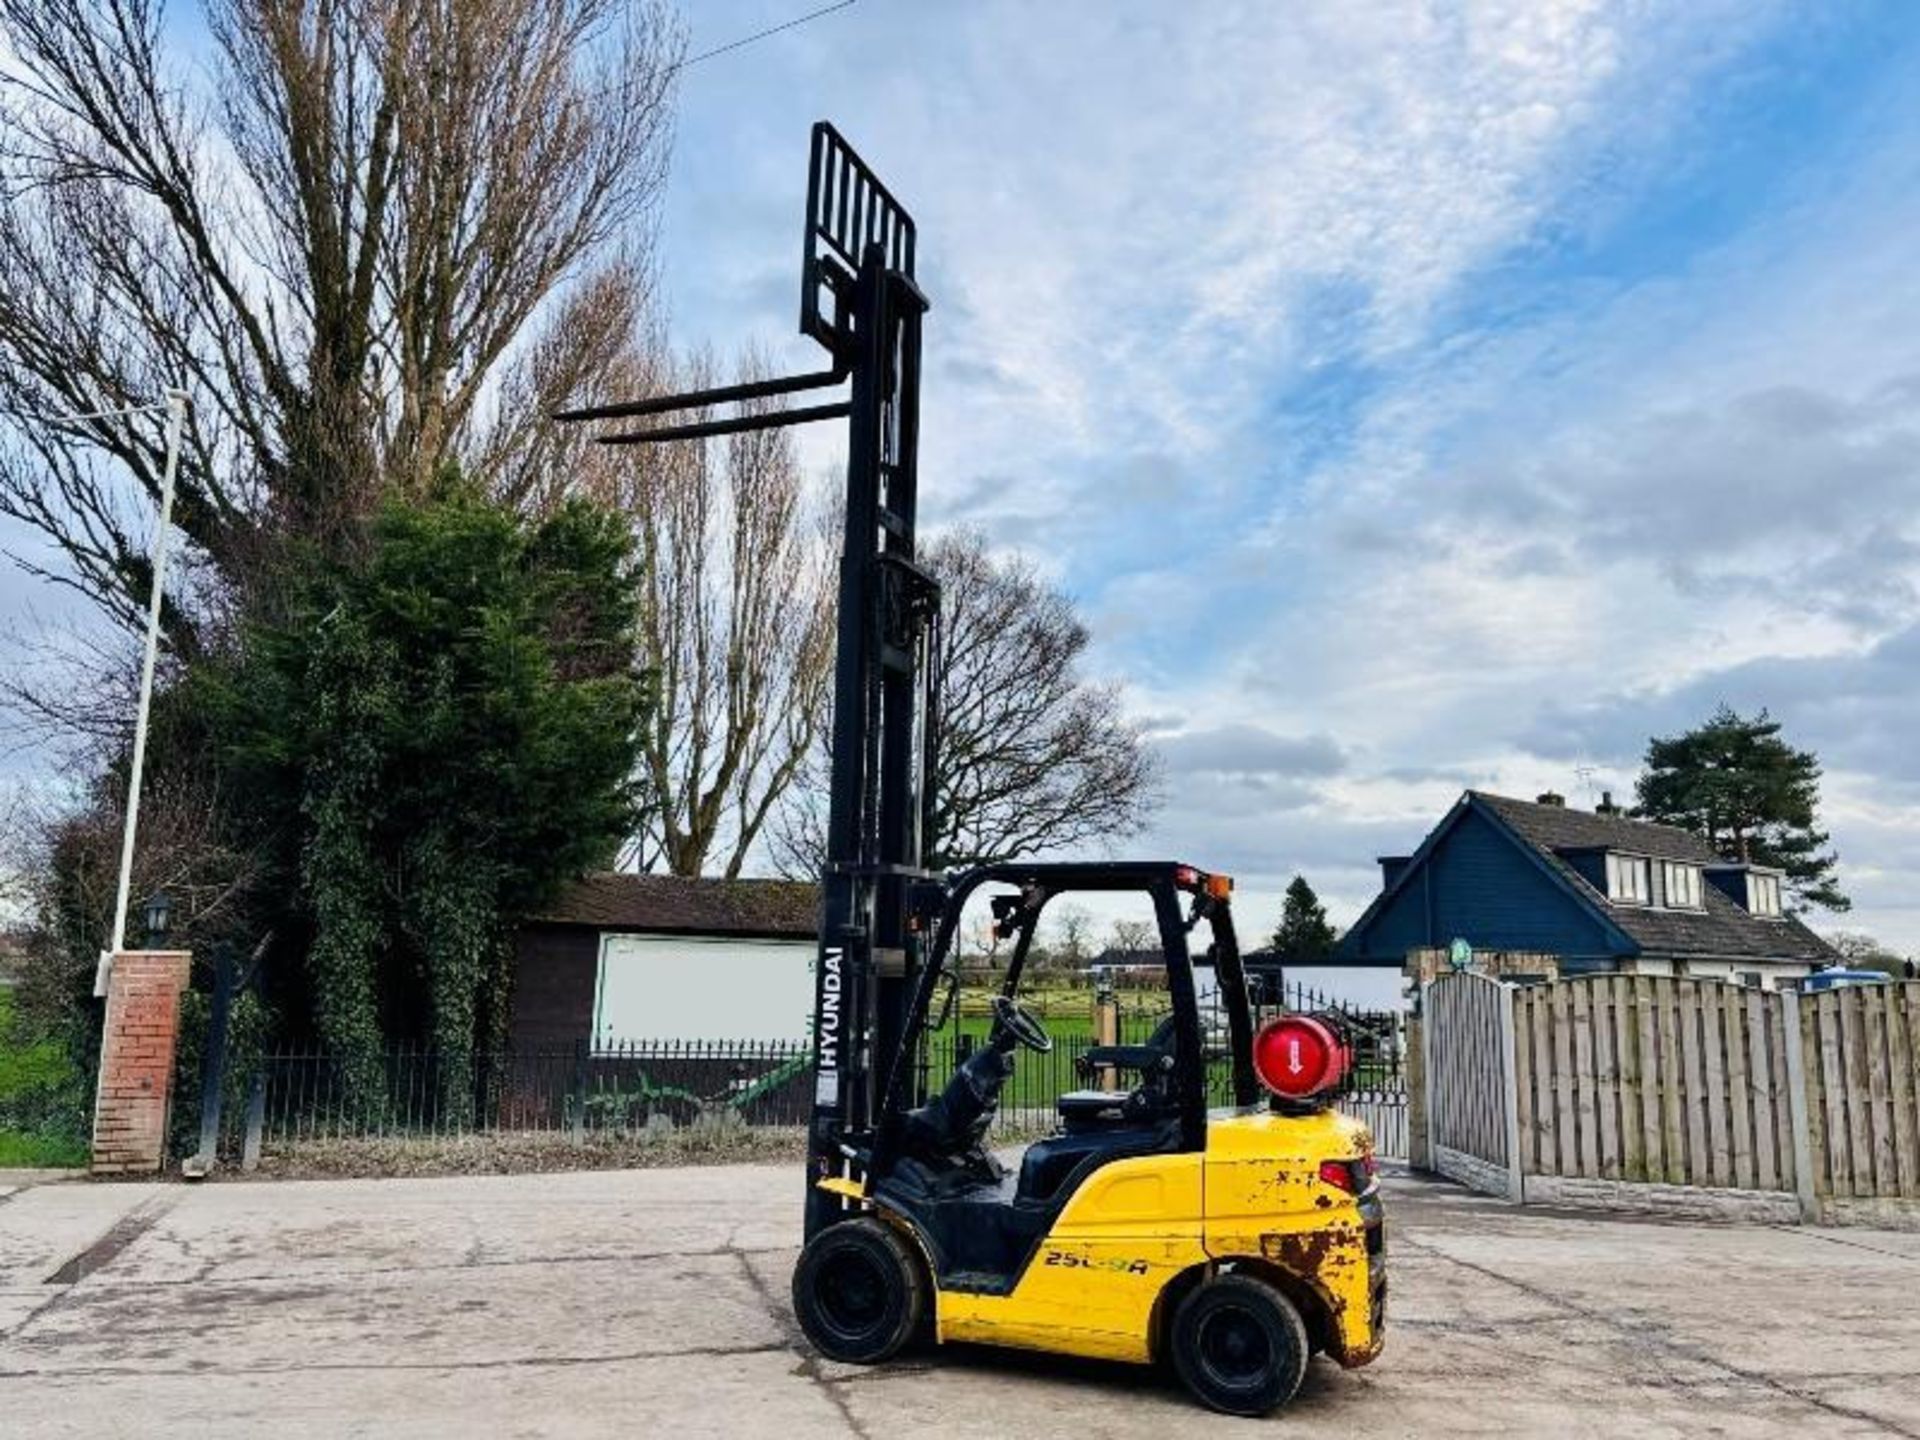 HYUNDAI 25L-9A CONTAINER SPEC FORKLIFT *YEAR 2017, 4463 HOURS* C/W PALLET TINES - Image 5 of 18